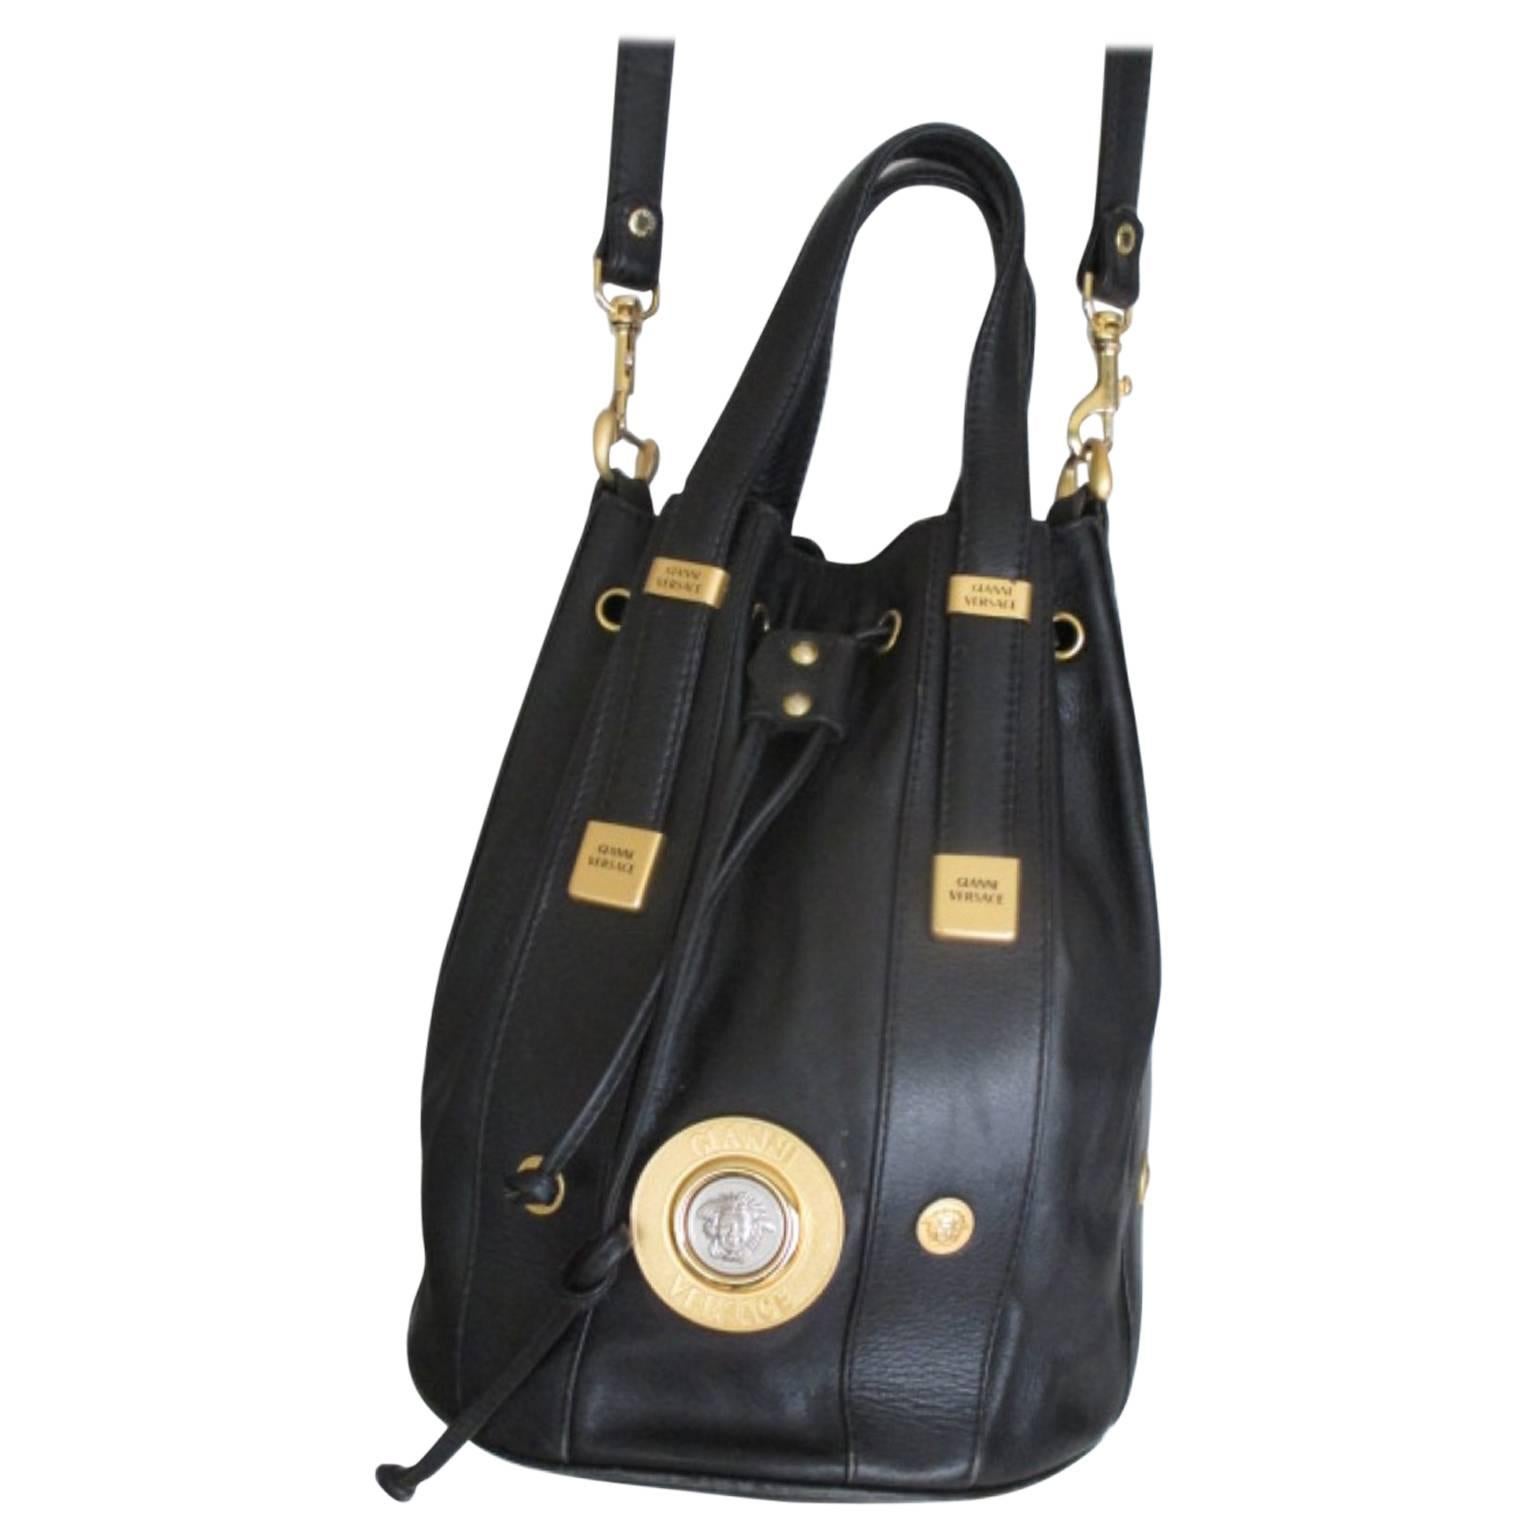 Gianni Versace black leather bag with gold medusa